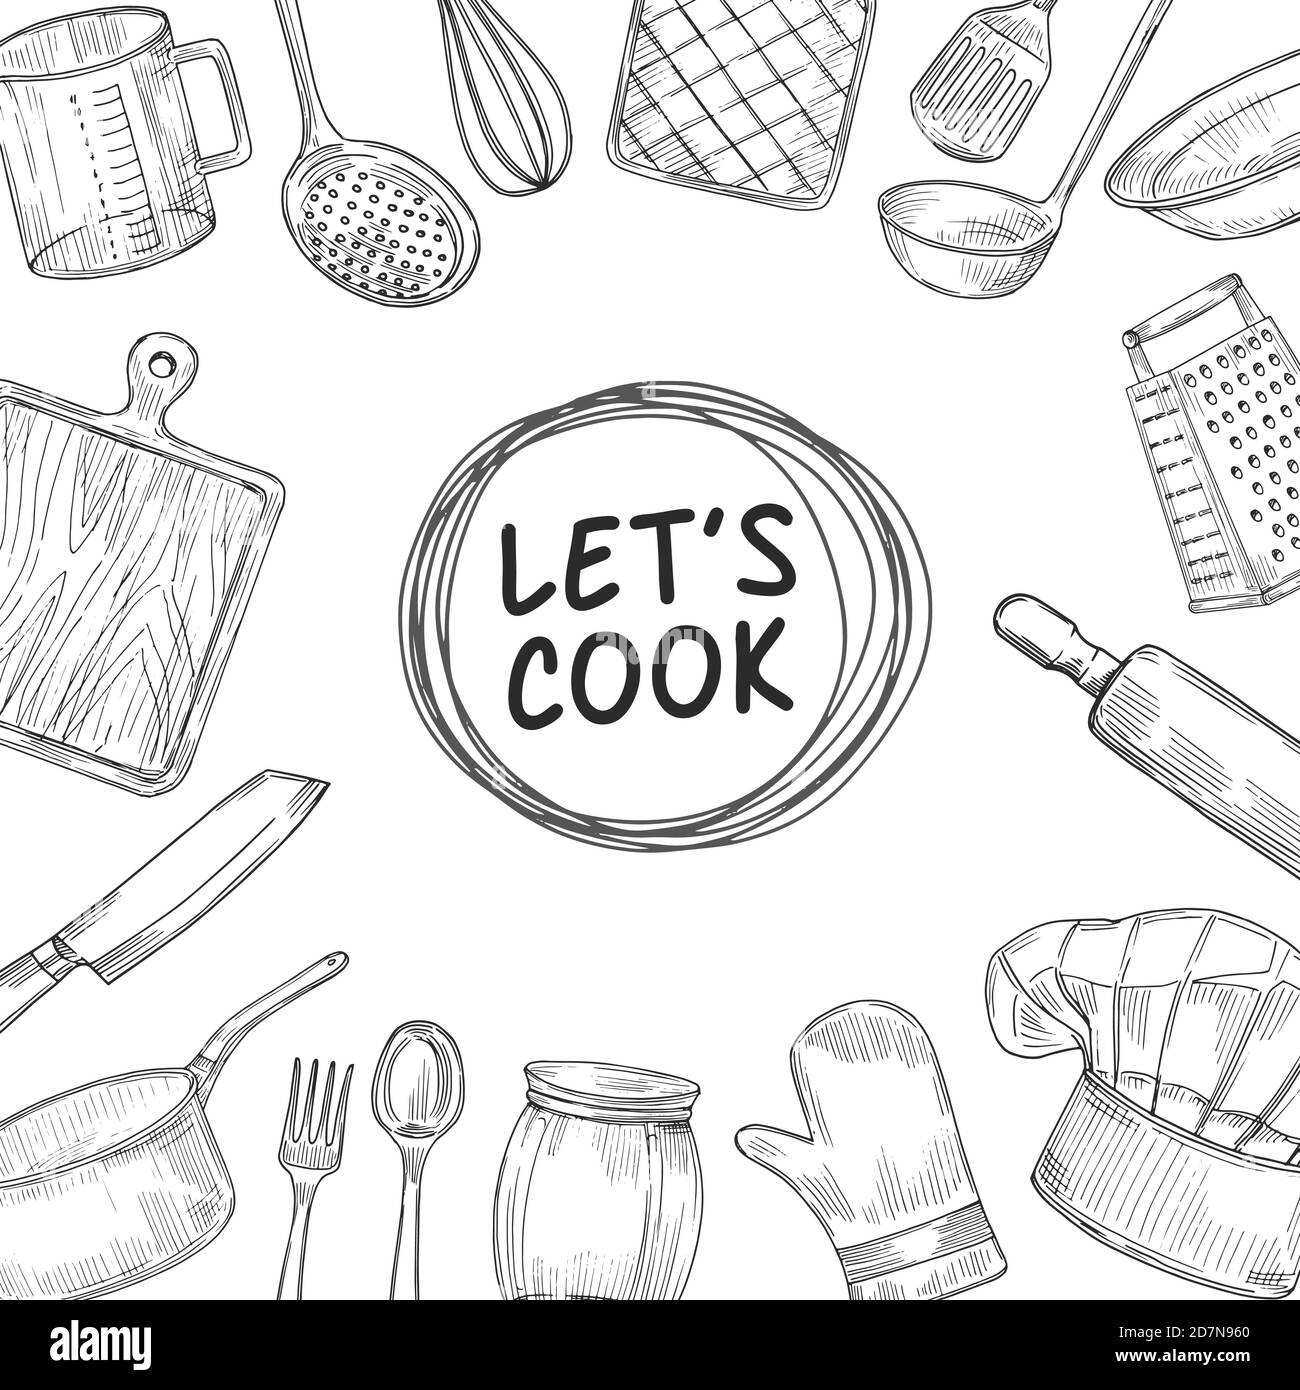 https://c8.alamy.com/comp/2D7N960/lets-cook-cooking-chef-class-sketch-background-culinary-kitchen-utensils-vintage-vector-illustration-cooking-dinner-sketch-drawing-cook-2D7N960.jpg